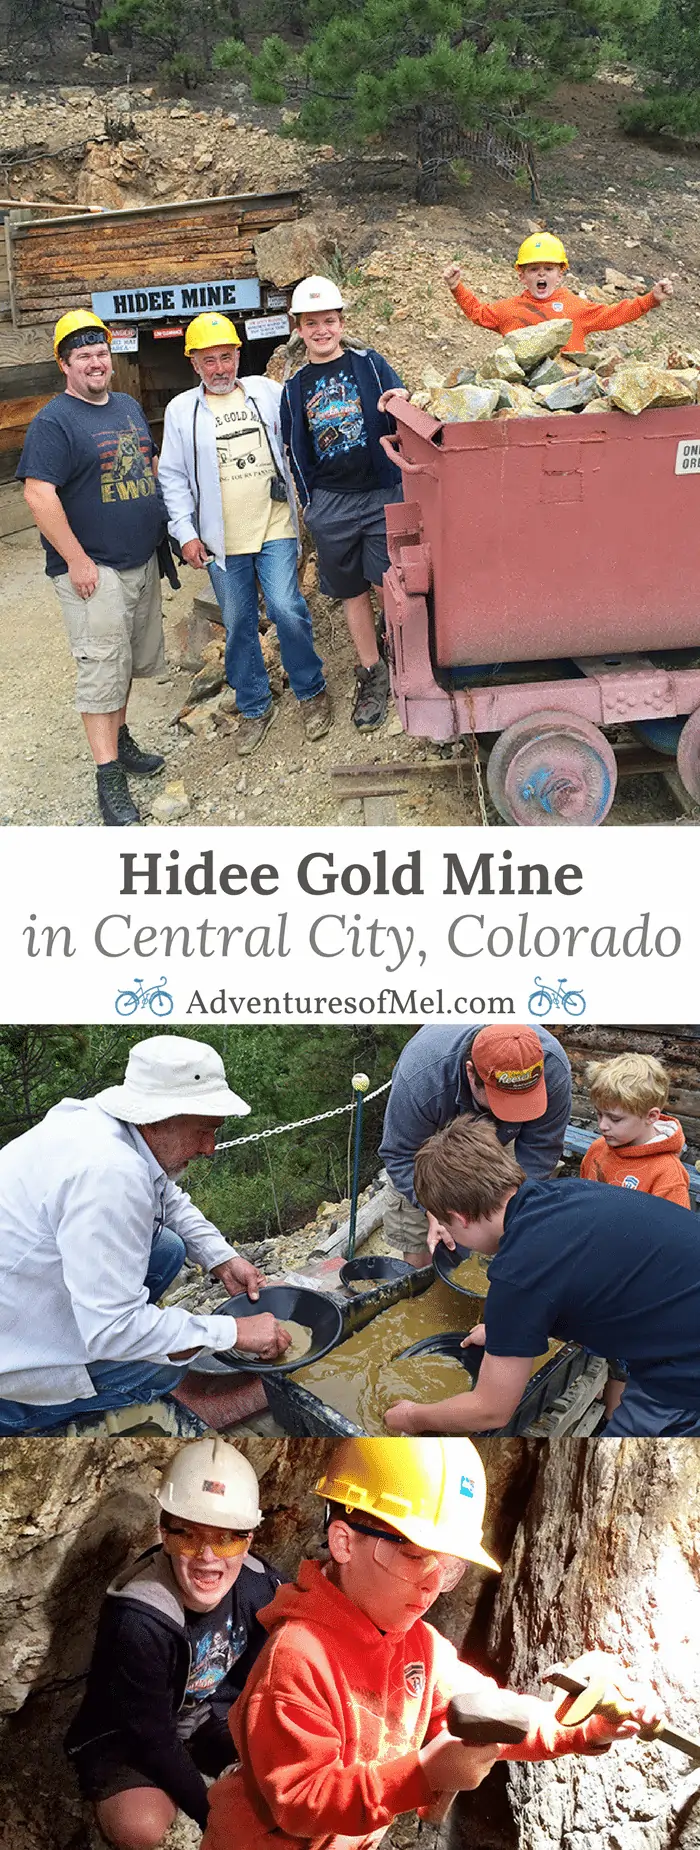 The Colorado mountains hold so many secrets and stories. Stories abound near Central City, Colorado at Hidee Gold Mine. It’s an unforgettable experience, taking a tour with a veteran miner, learning the history of Hidee Mine, and mining your own gold. We couldn’t stop talking about it; it was definitely one of our family’s favorite memories from summer vacation.